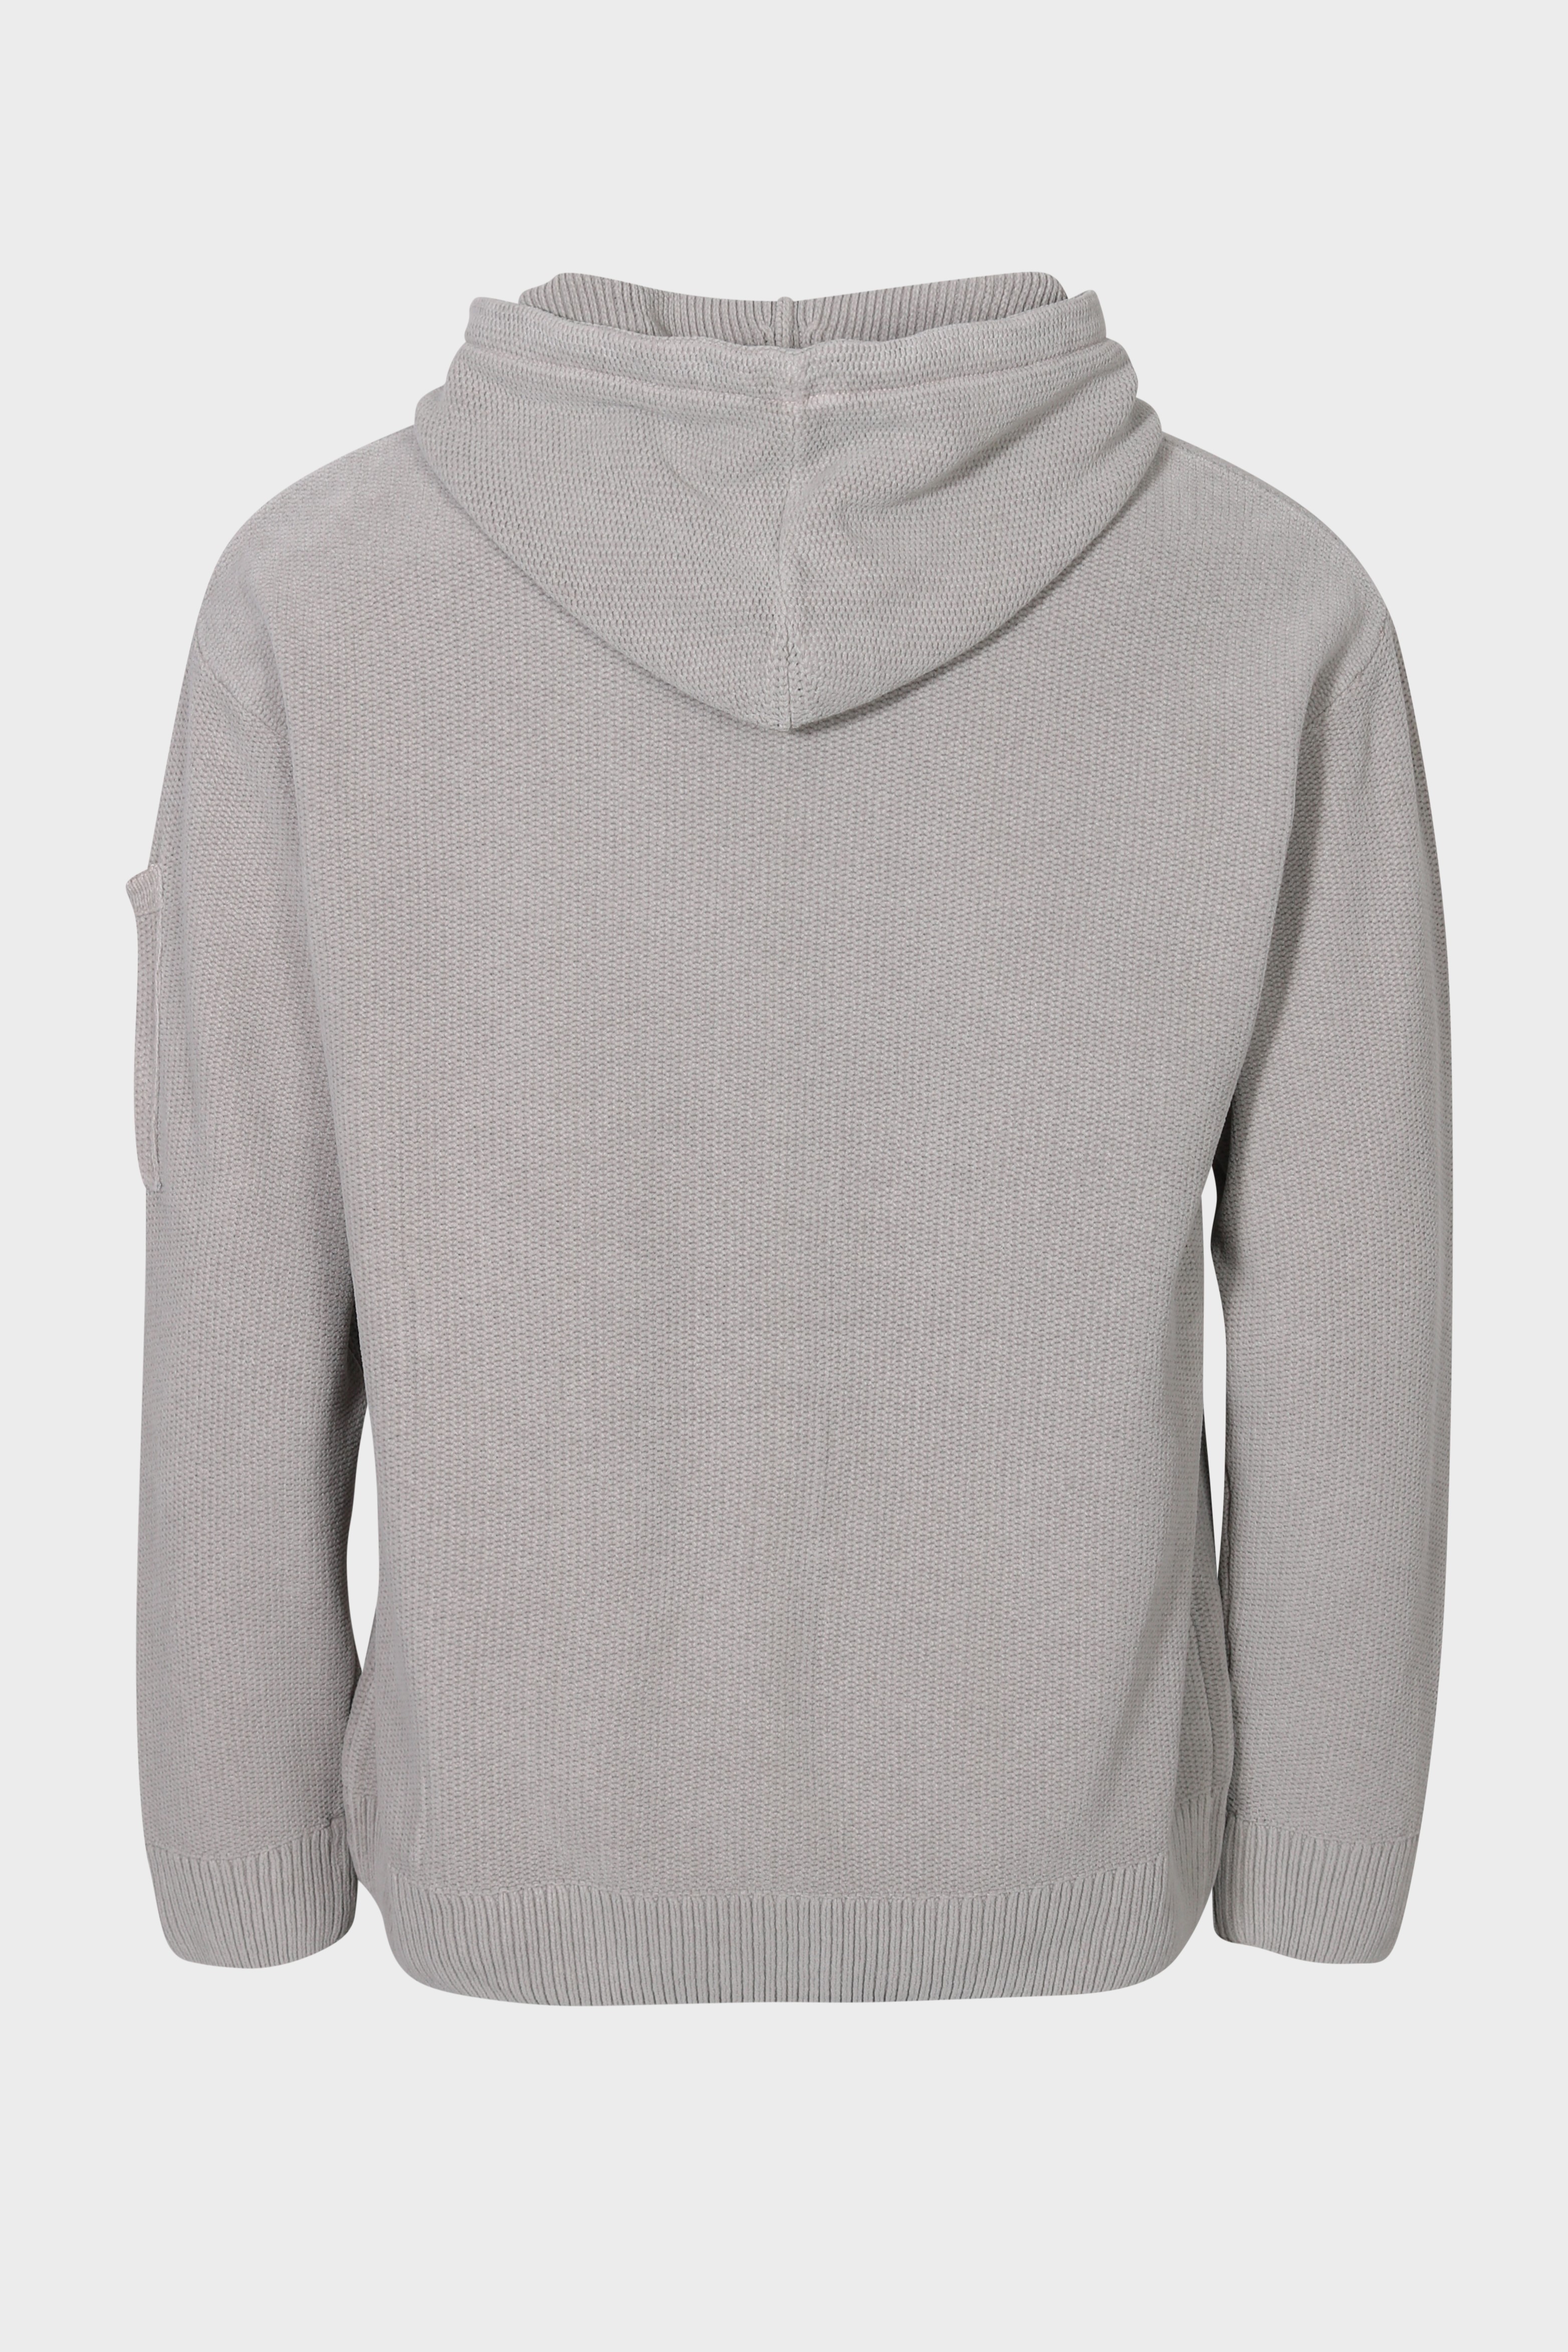 C.P. COMPANY Soft Knit Hoodie in Drizzle Grey 54